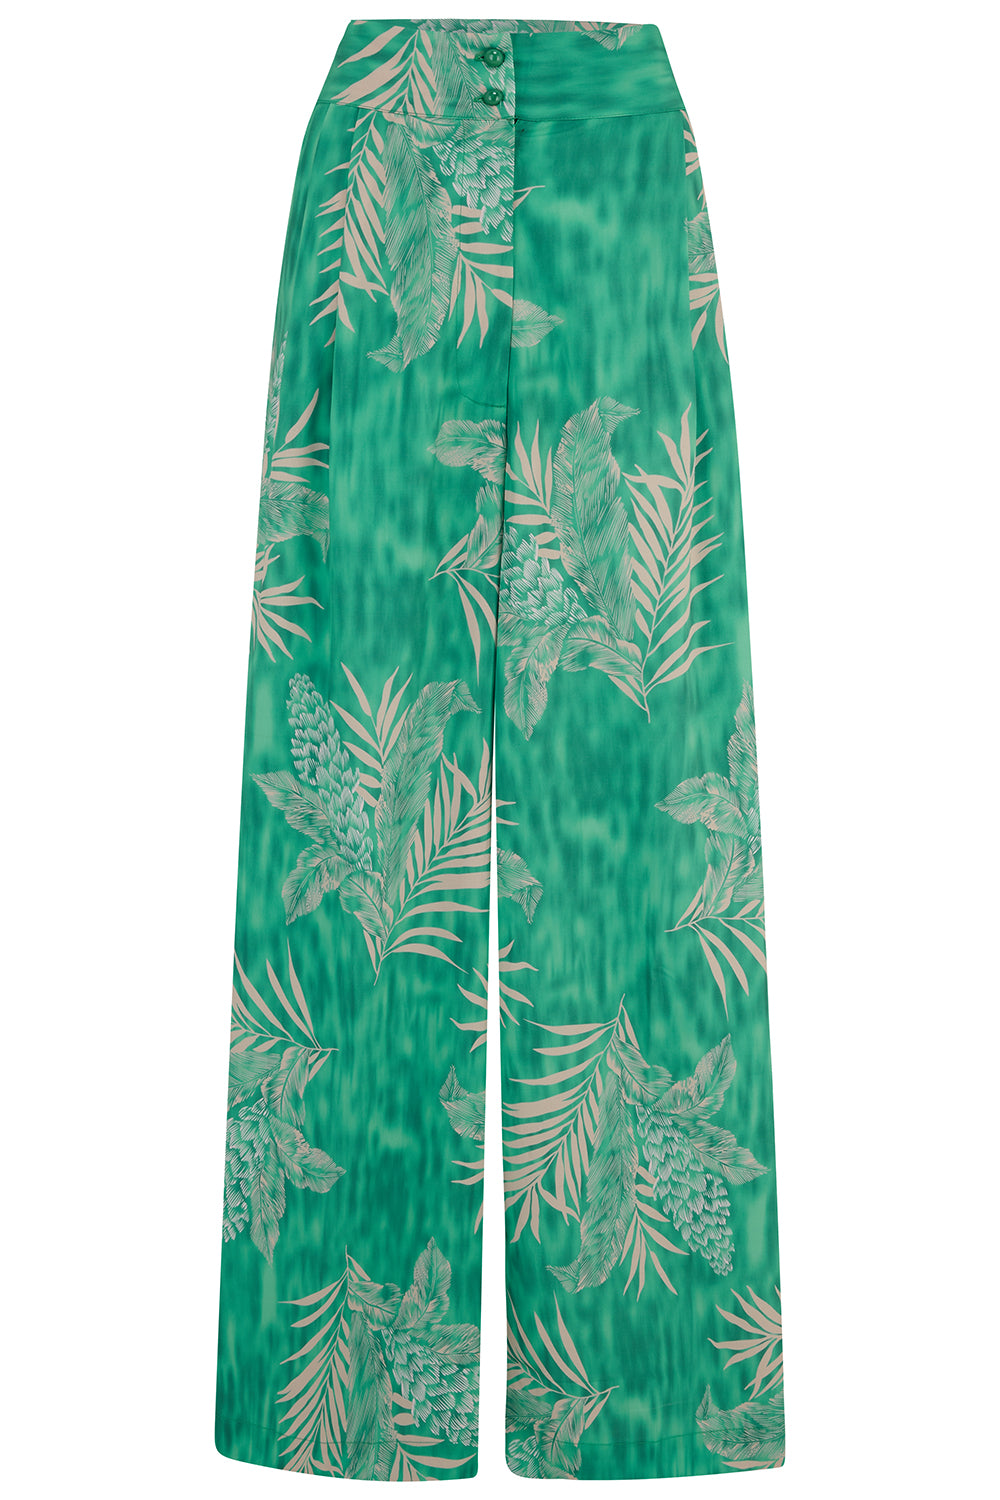 The "Sophia" Palazzo Wide Leg Trousers in Emerald Palm Print, Easy To Wear Vintage Inspired Style